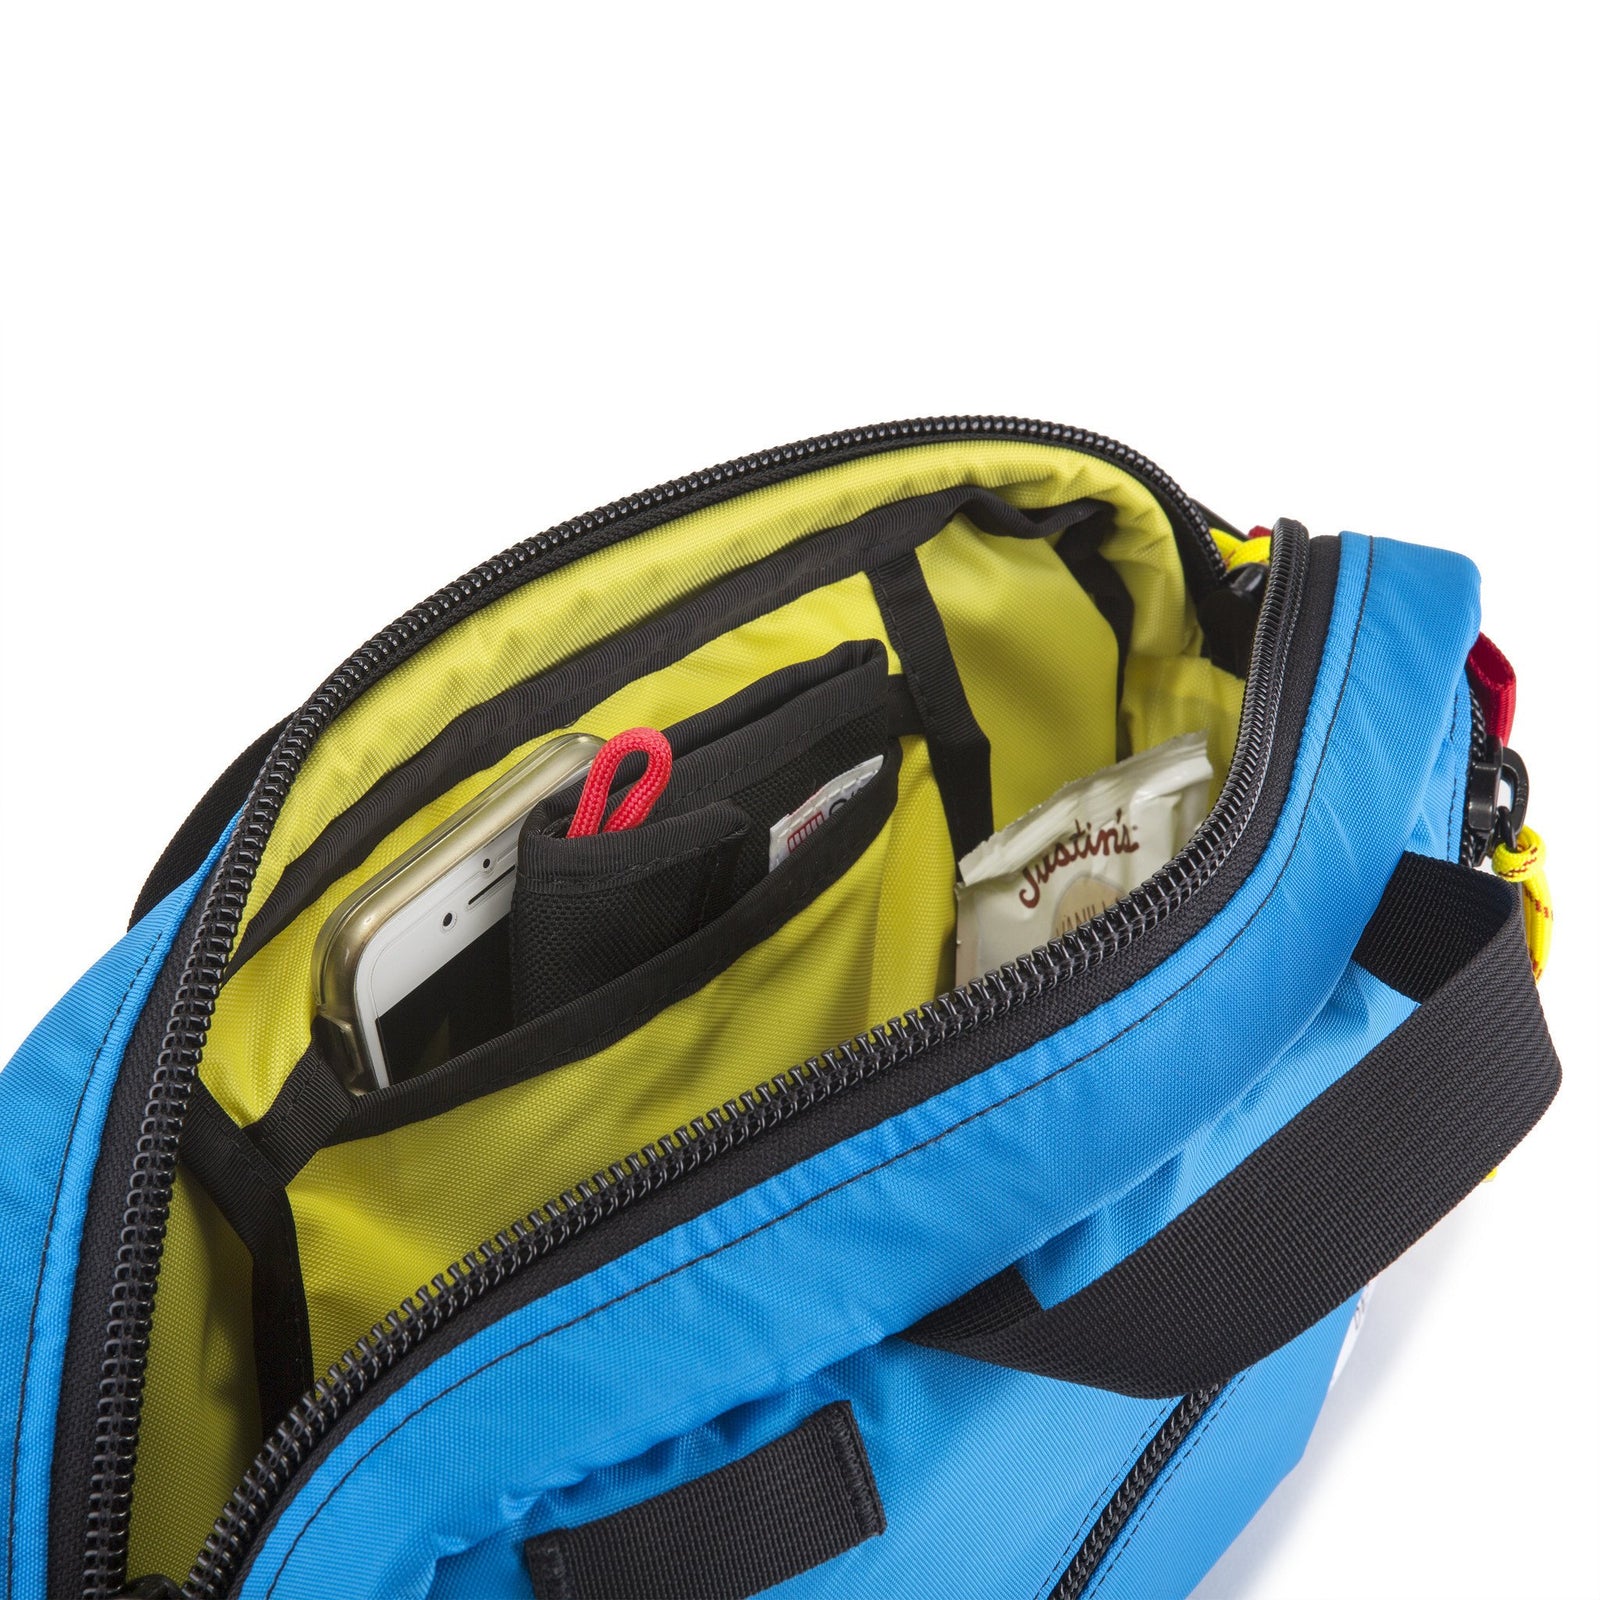 General detail shot of Topo Designs Quick Pack in Blue showing open main compartment and internal pockets.